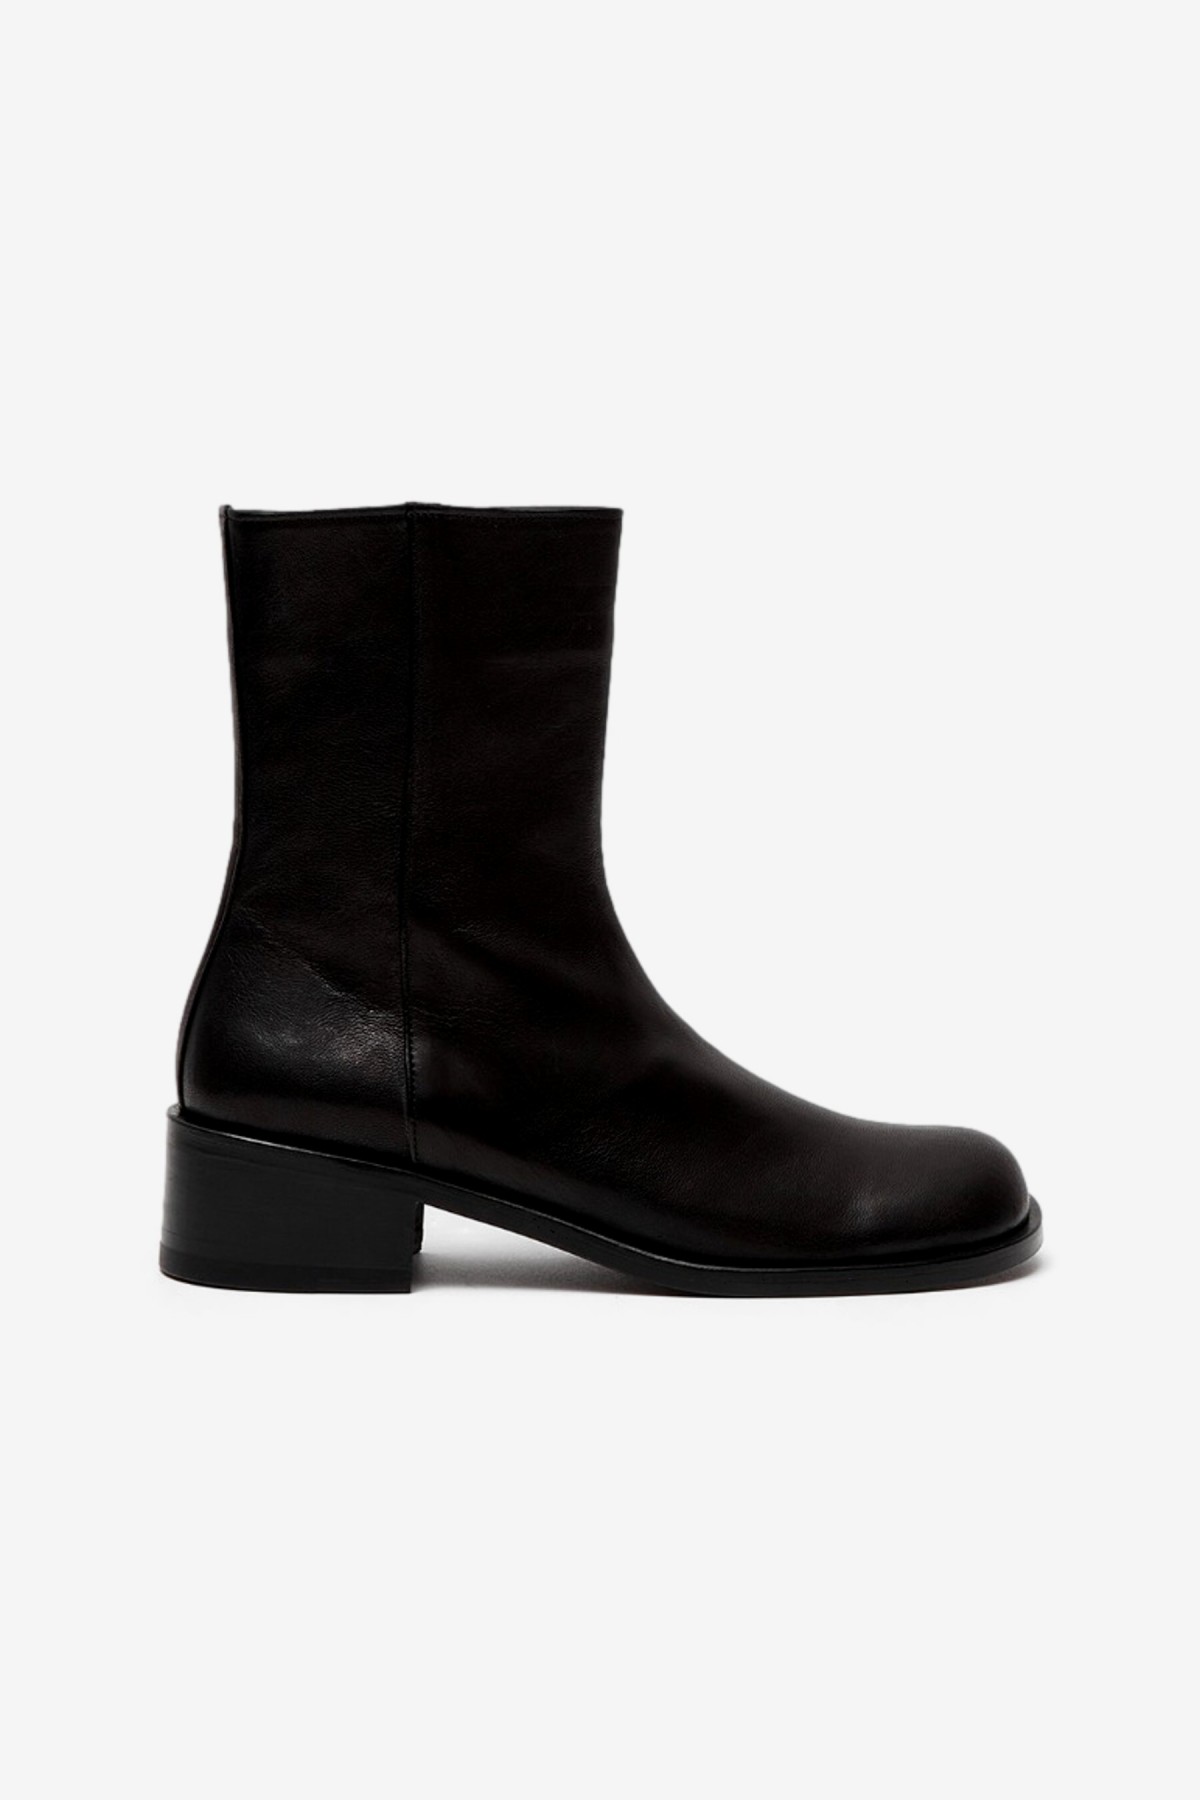 Amomento Ankle Boots in Black